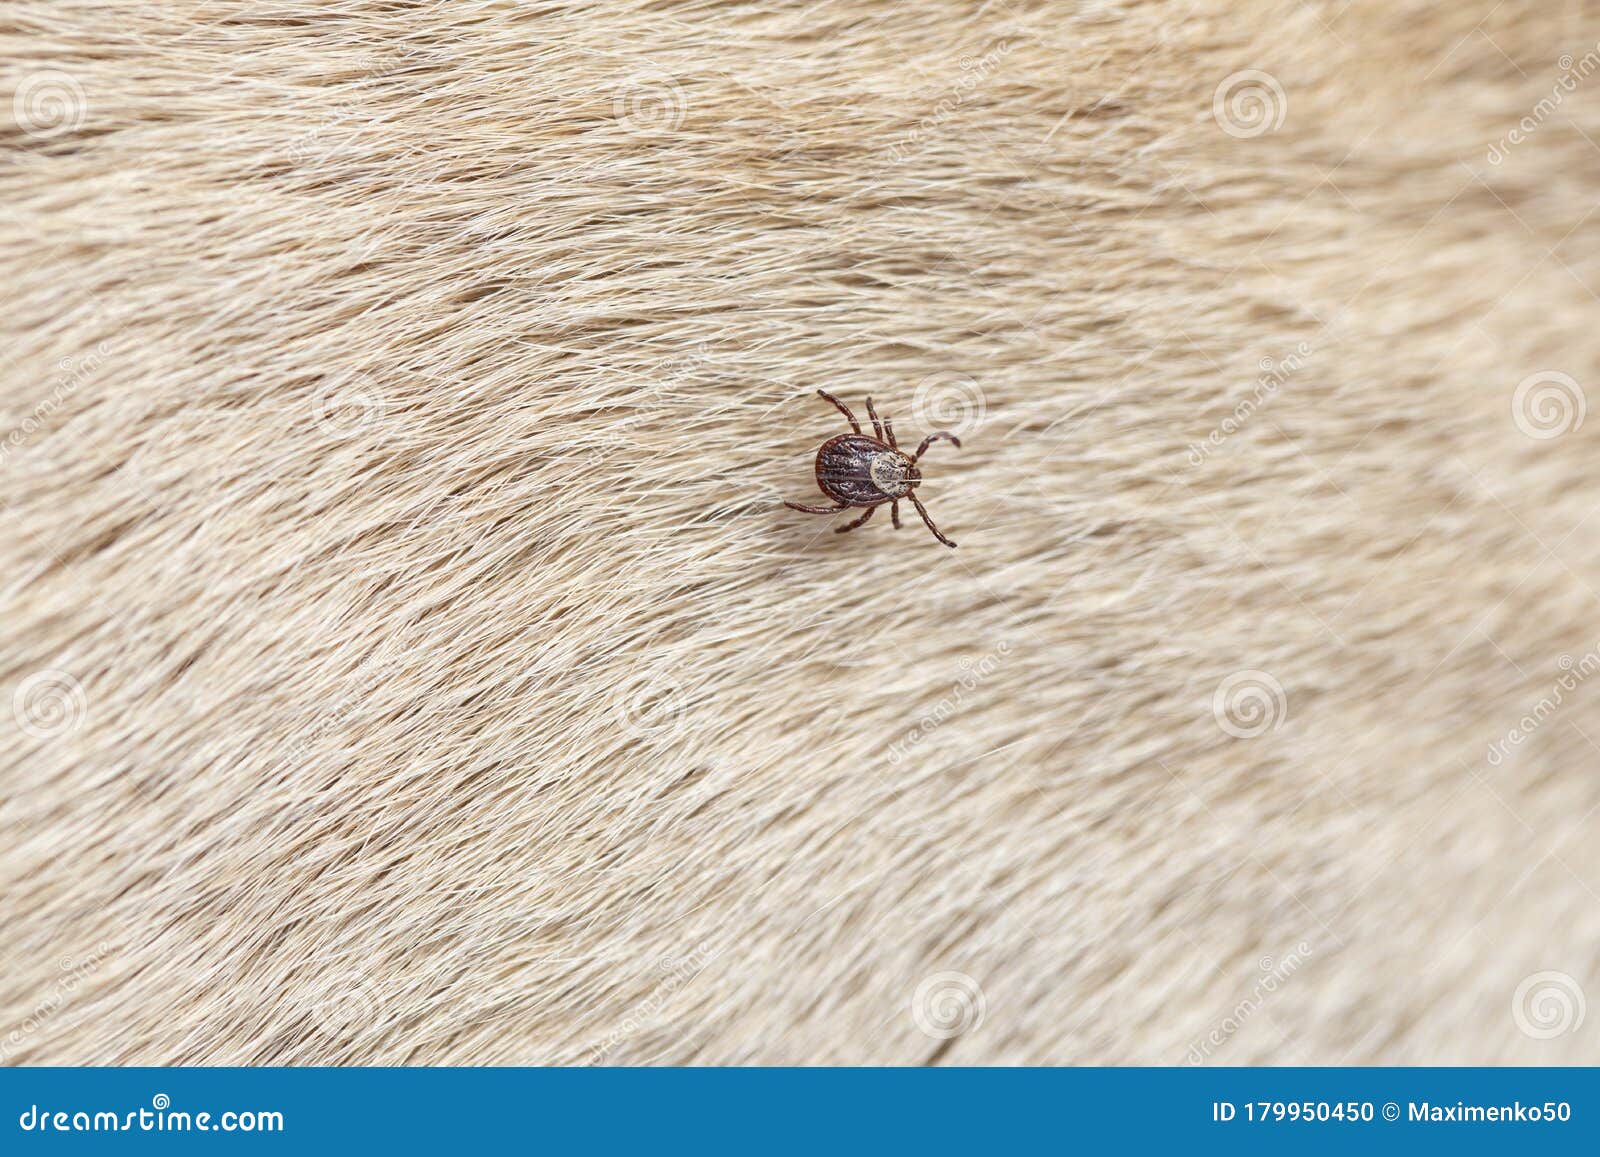 Infected Female Tick On Dog Fur Copy Spaces Stock Photo Image Of